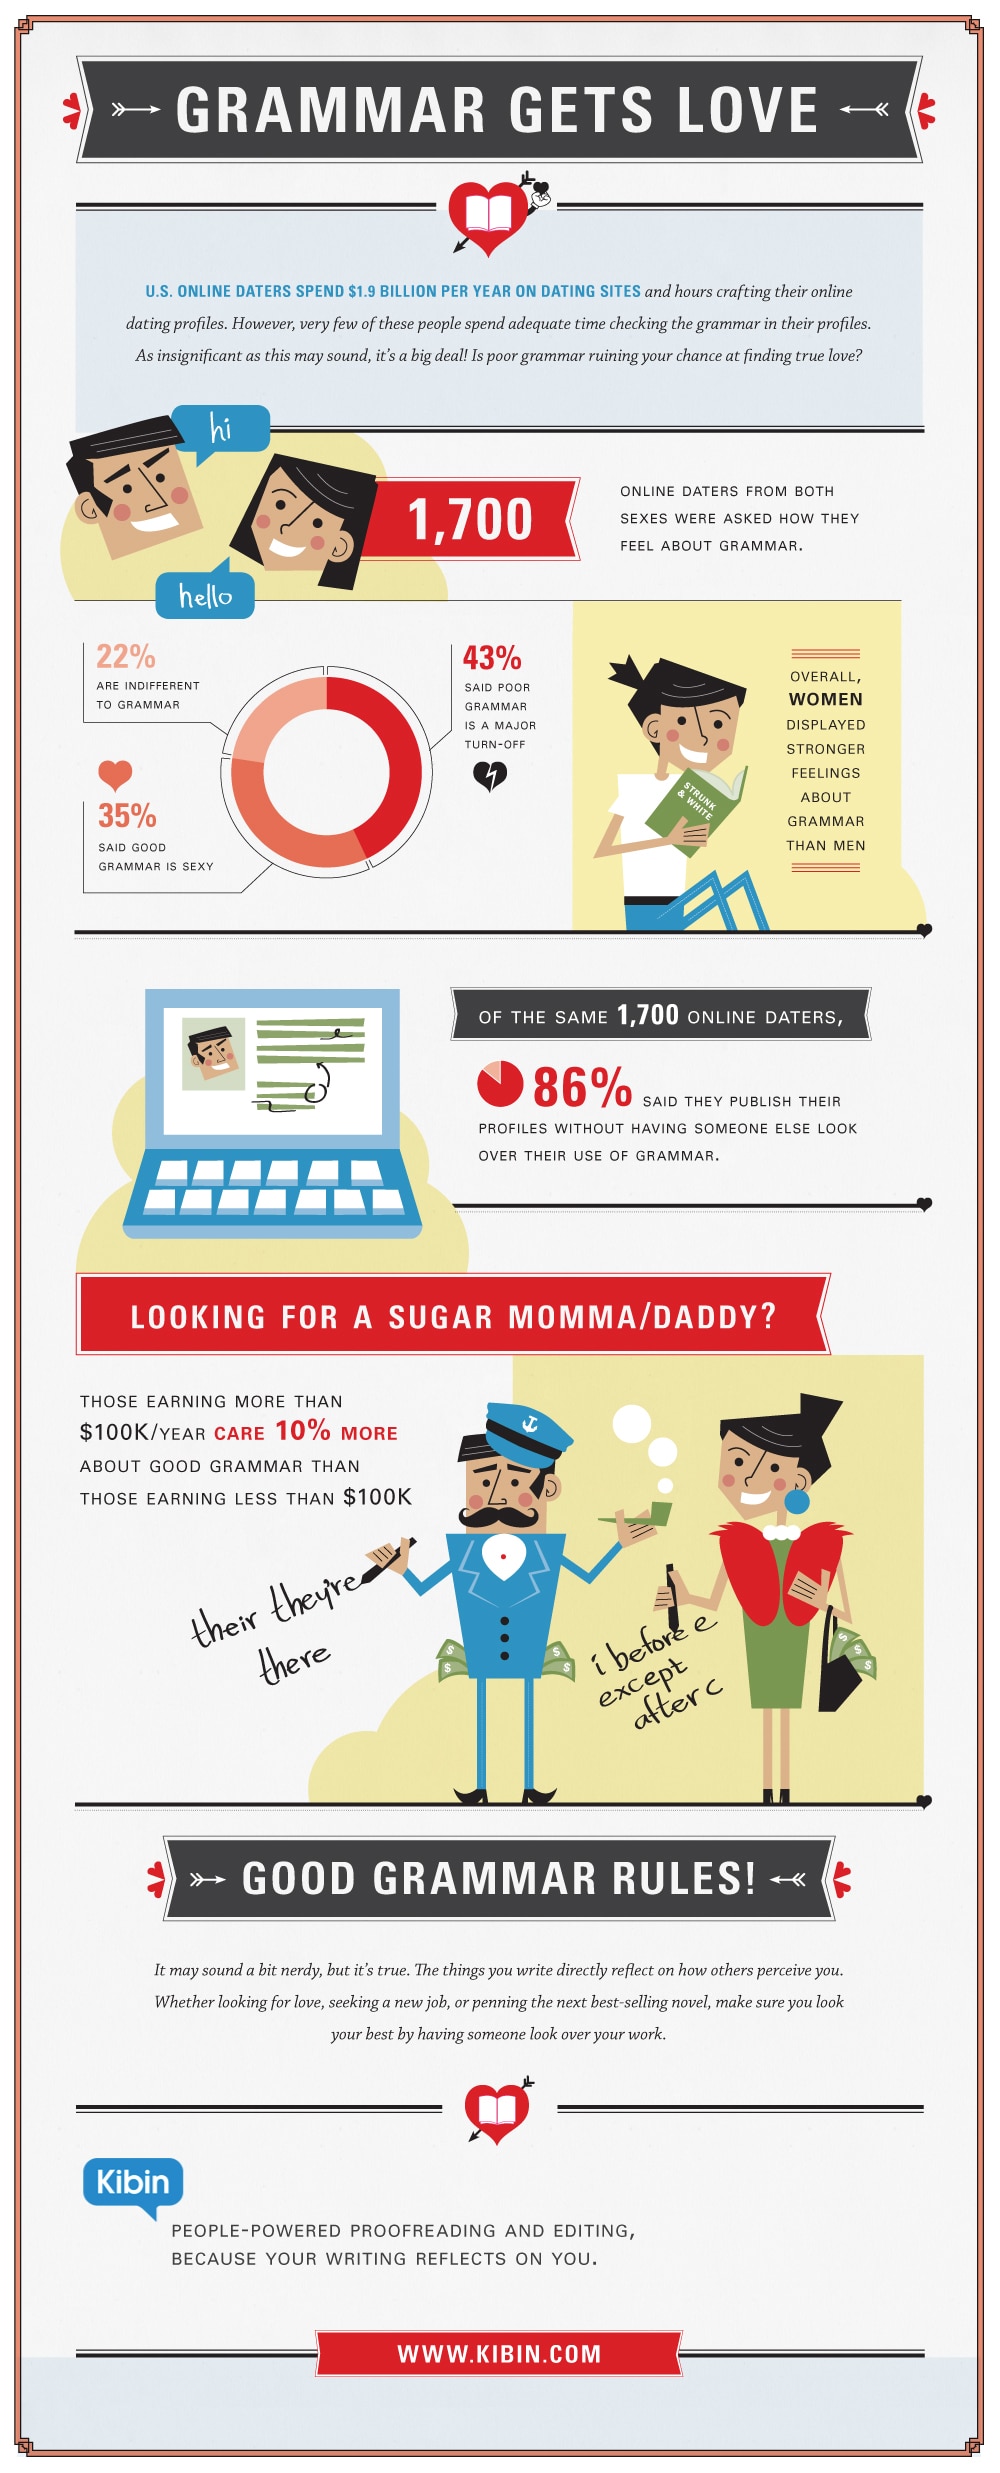 How Using Good Grammar Online Can Help You Find Love [Infographic]